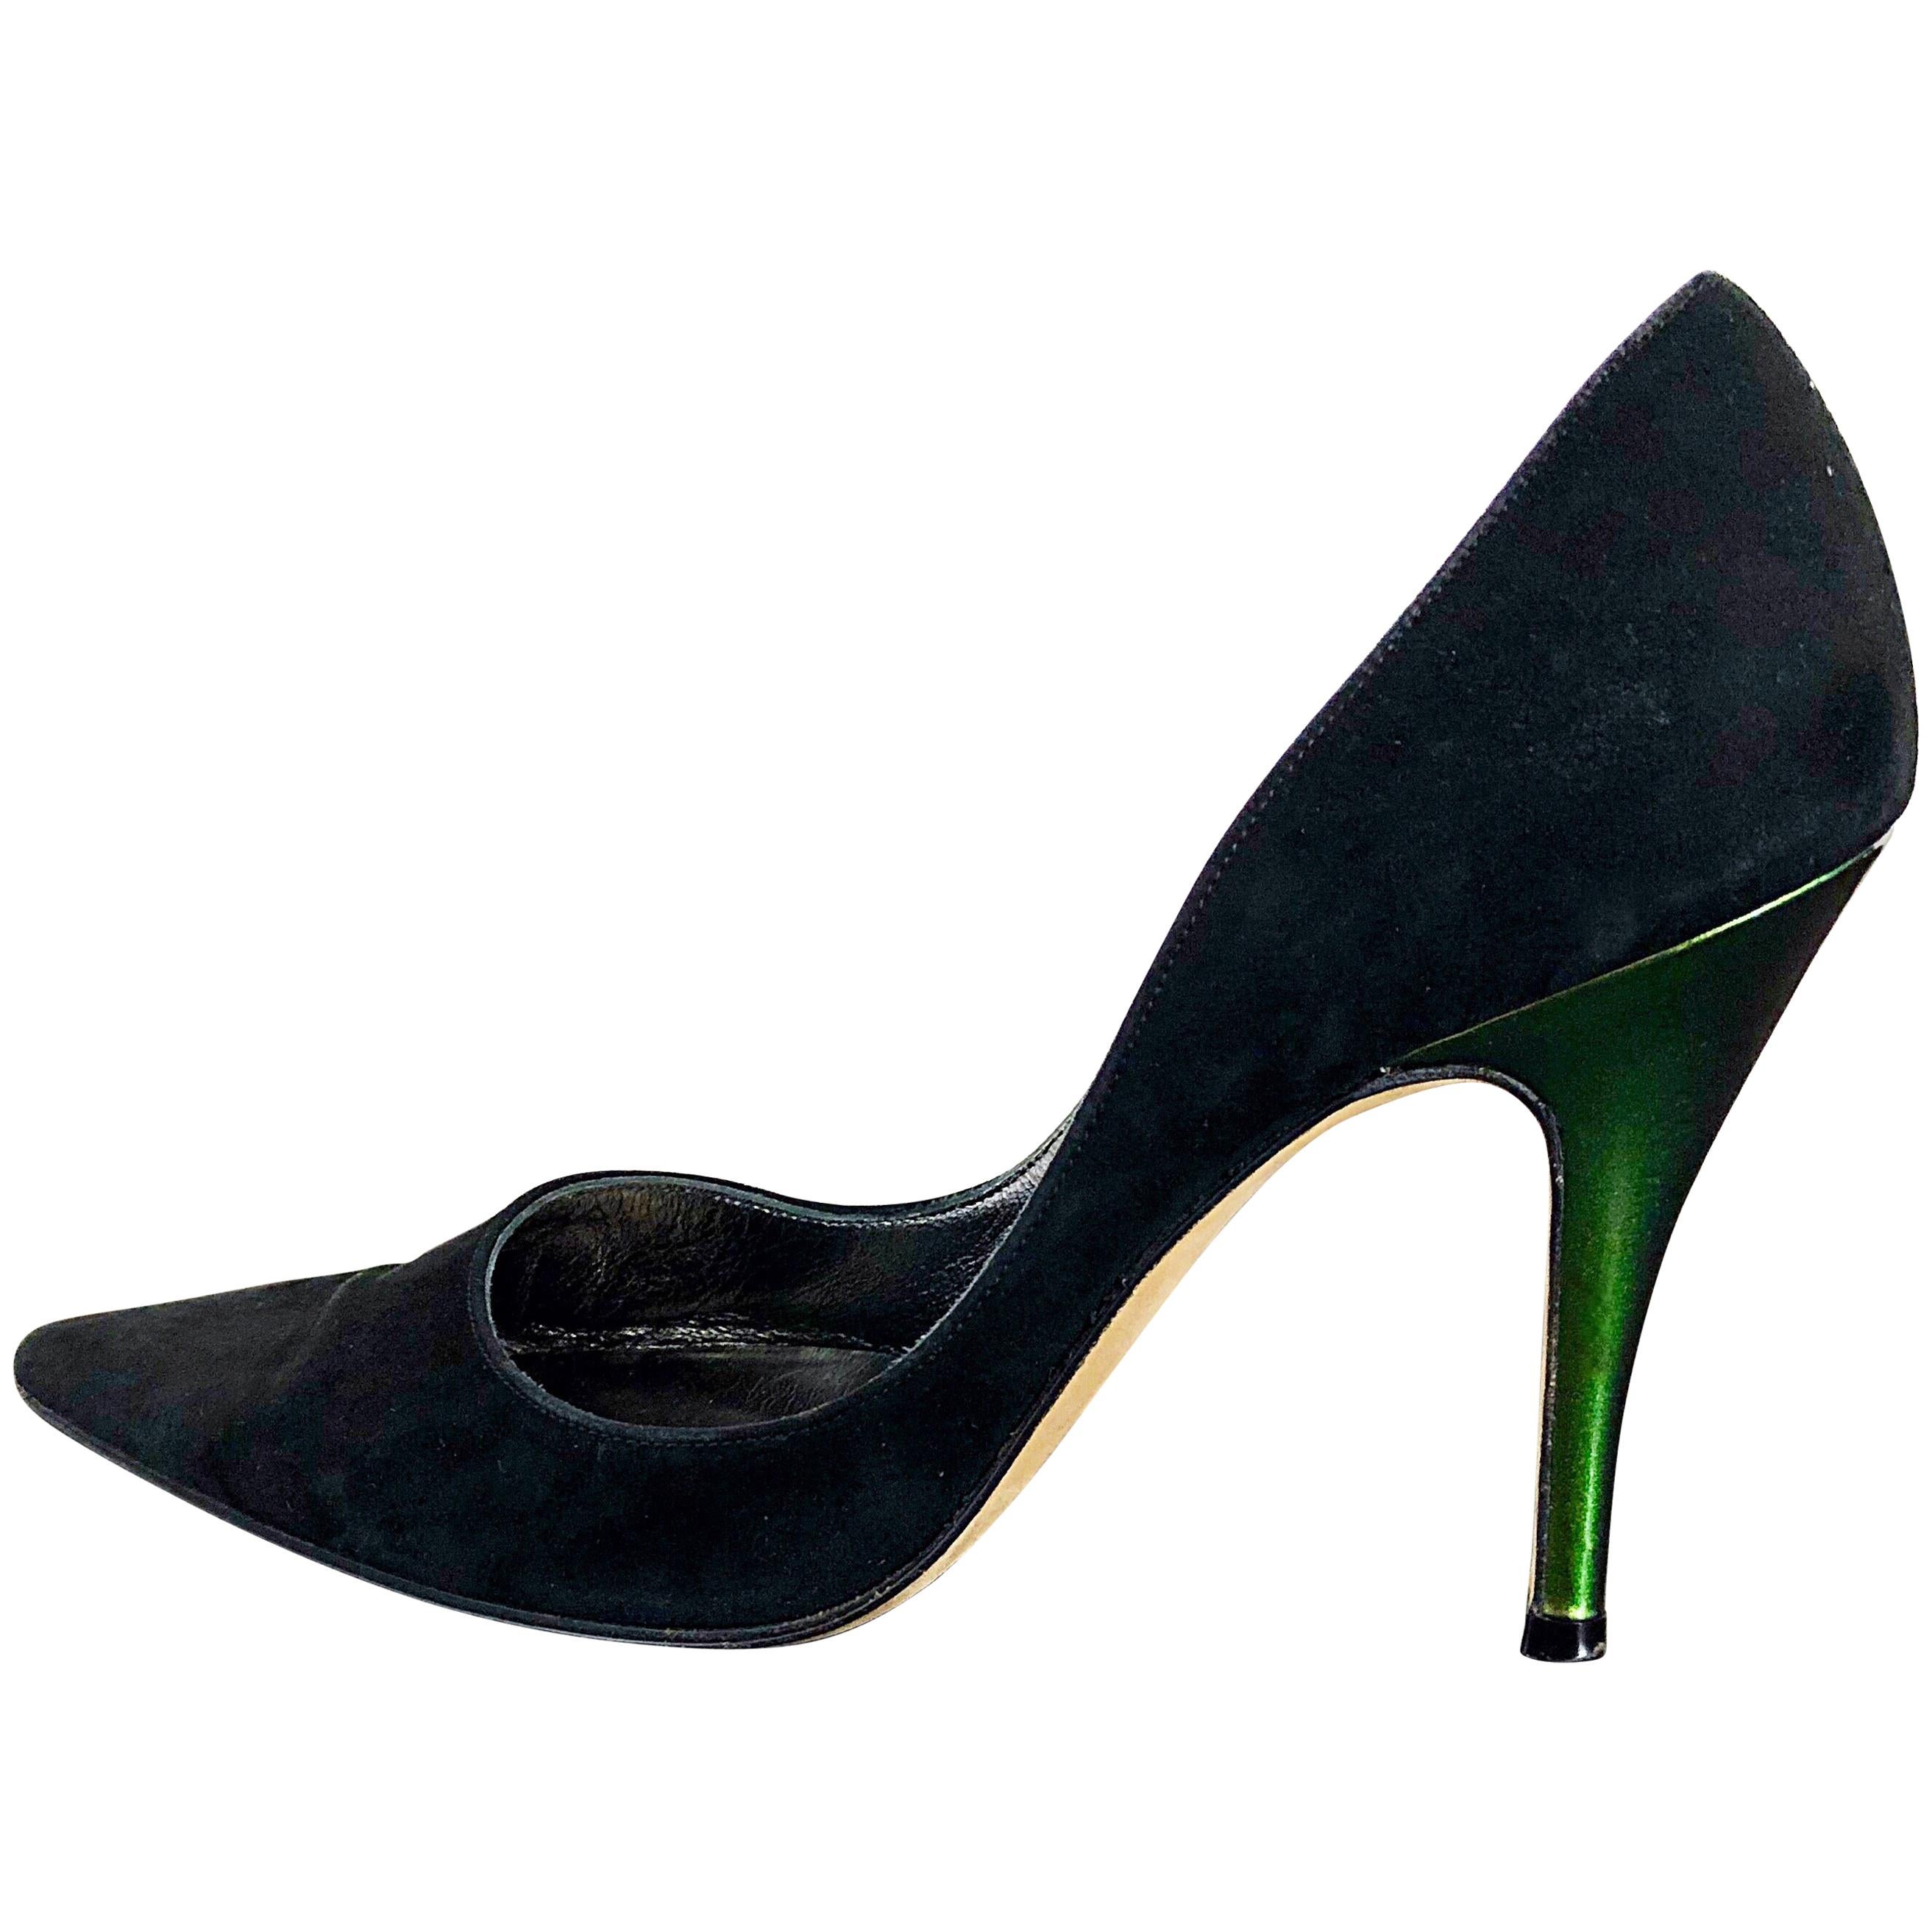 Sexy Vintage Christian Lacroix Size 37 / 7 Black + Green Suede 1990s high Heels